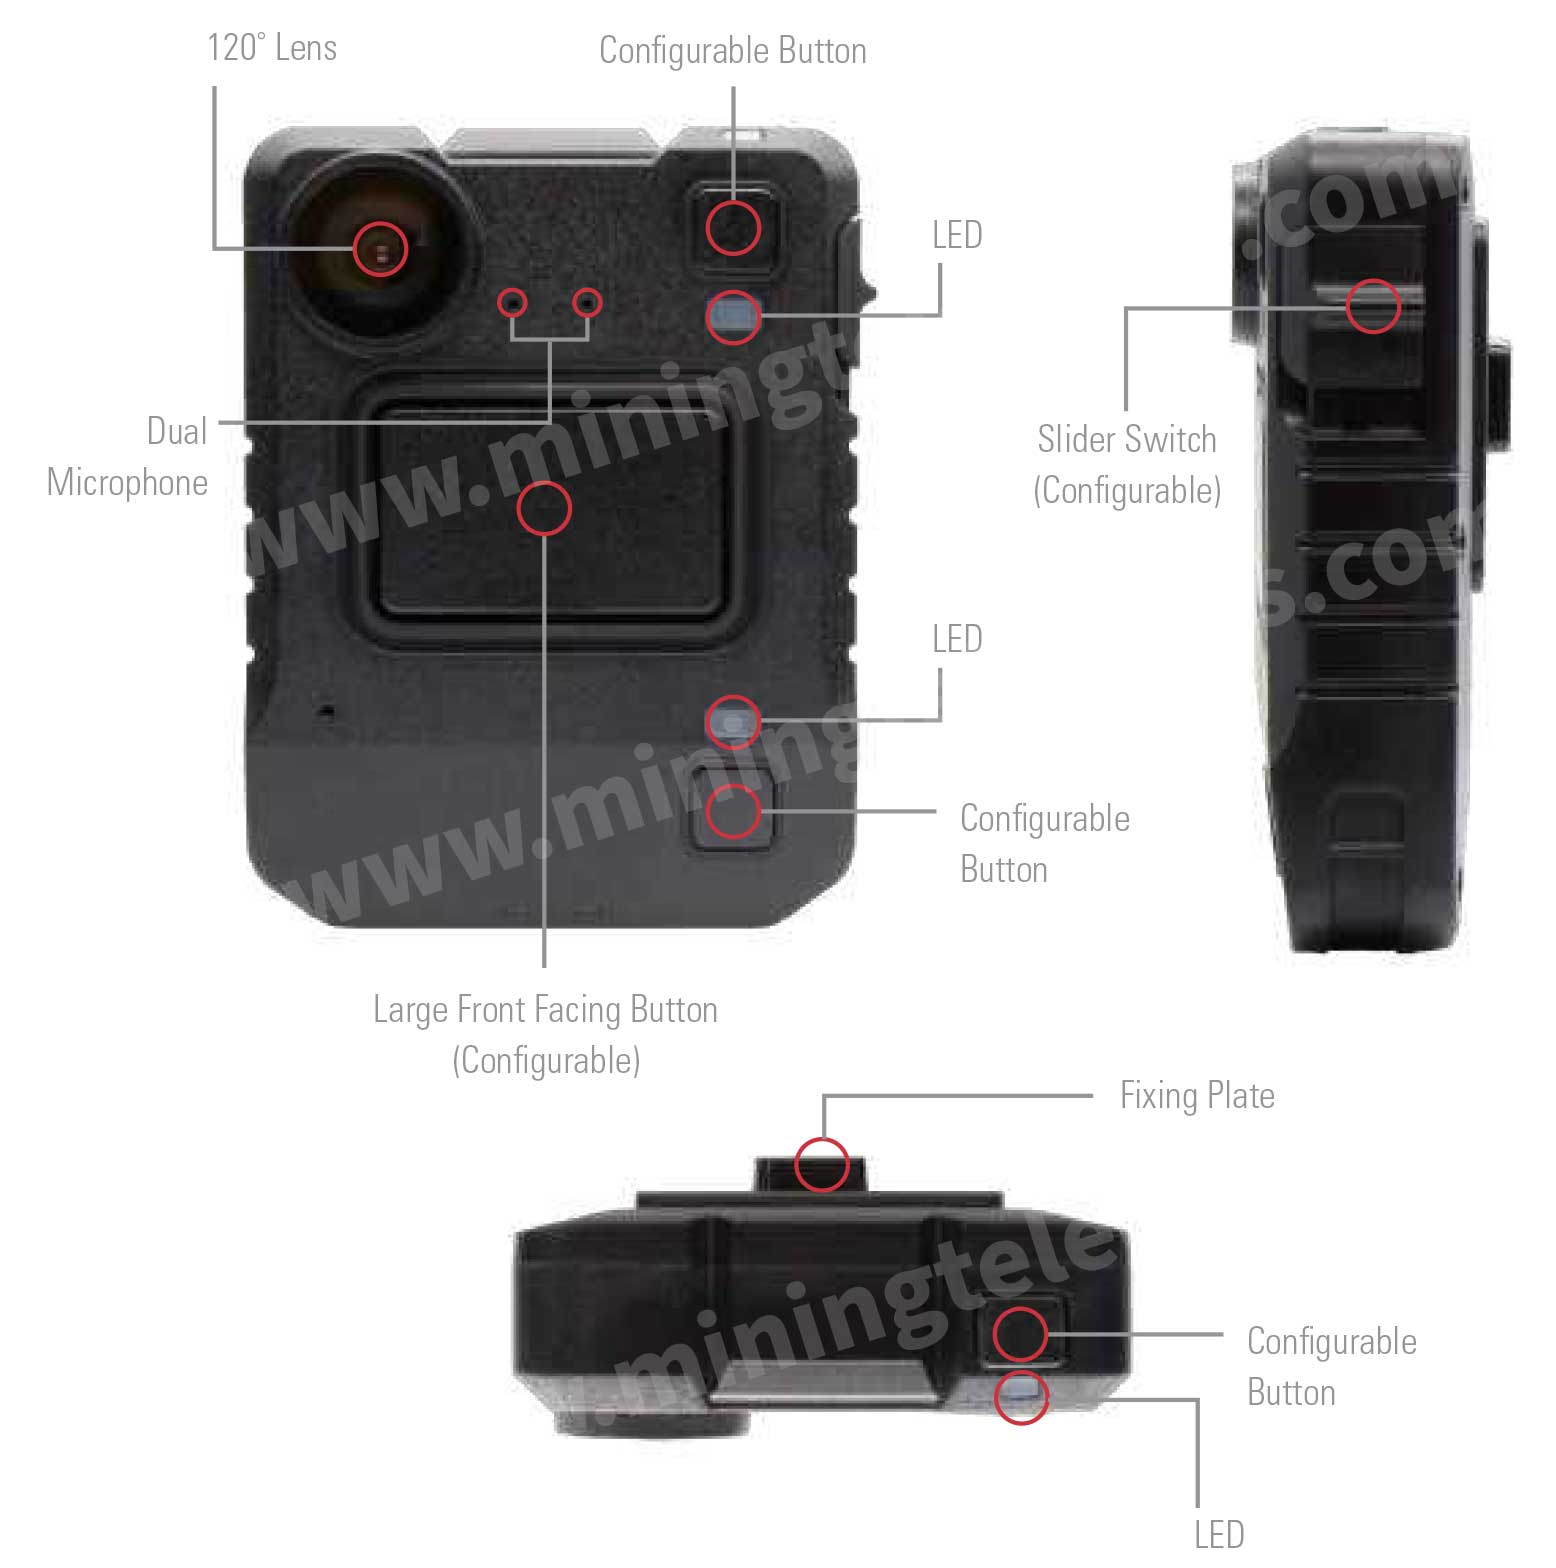 VB400 Body Worn Camera Features and Design